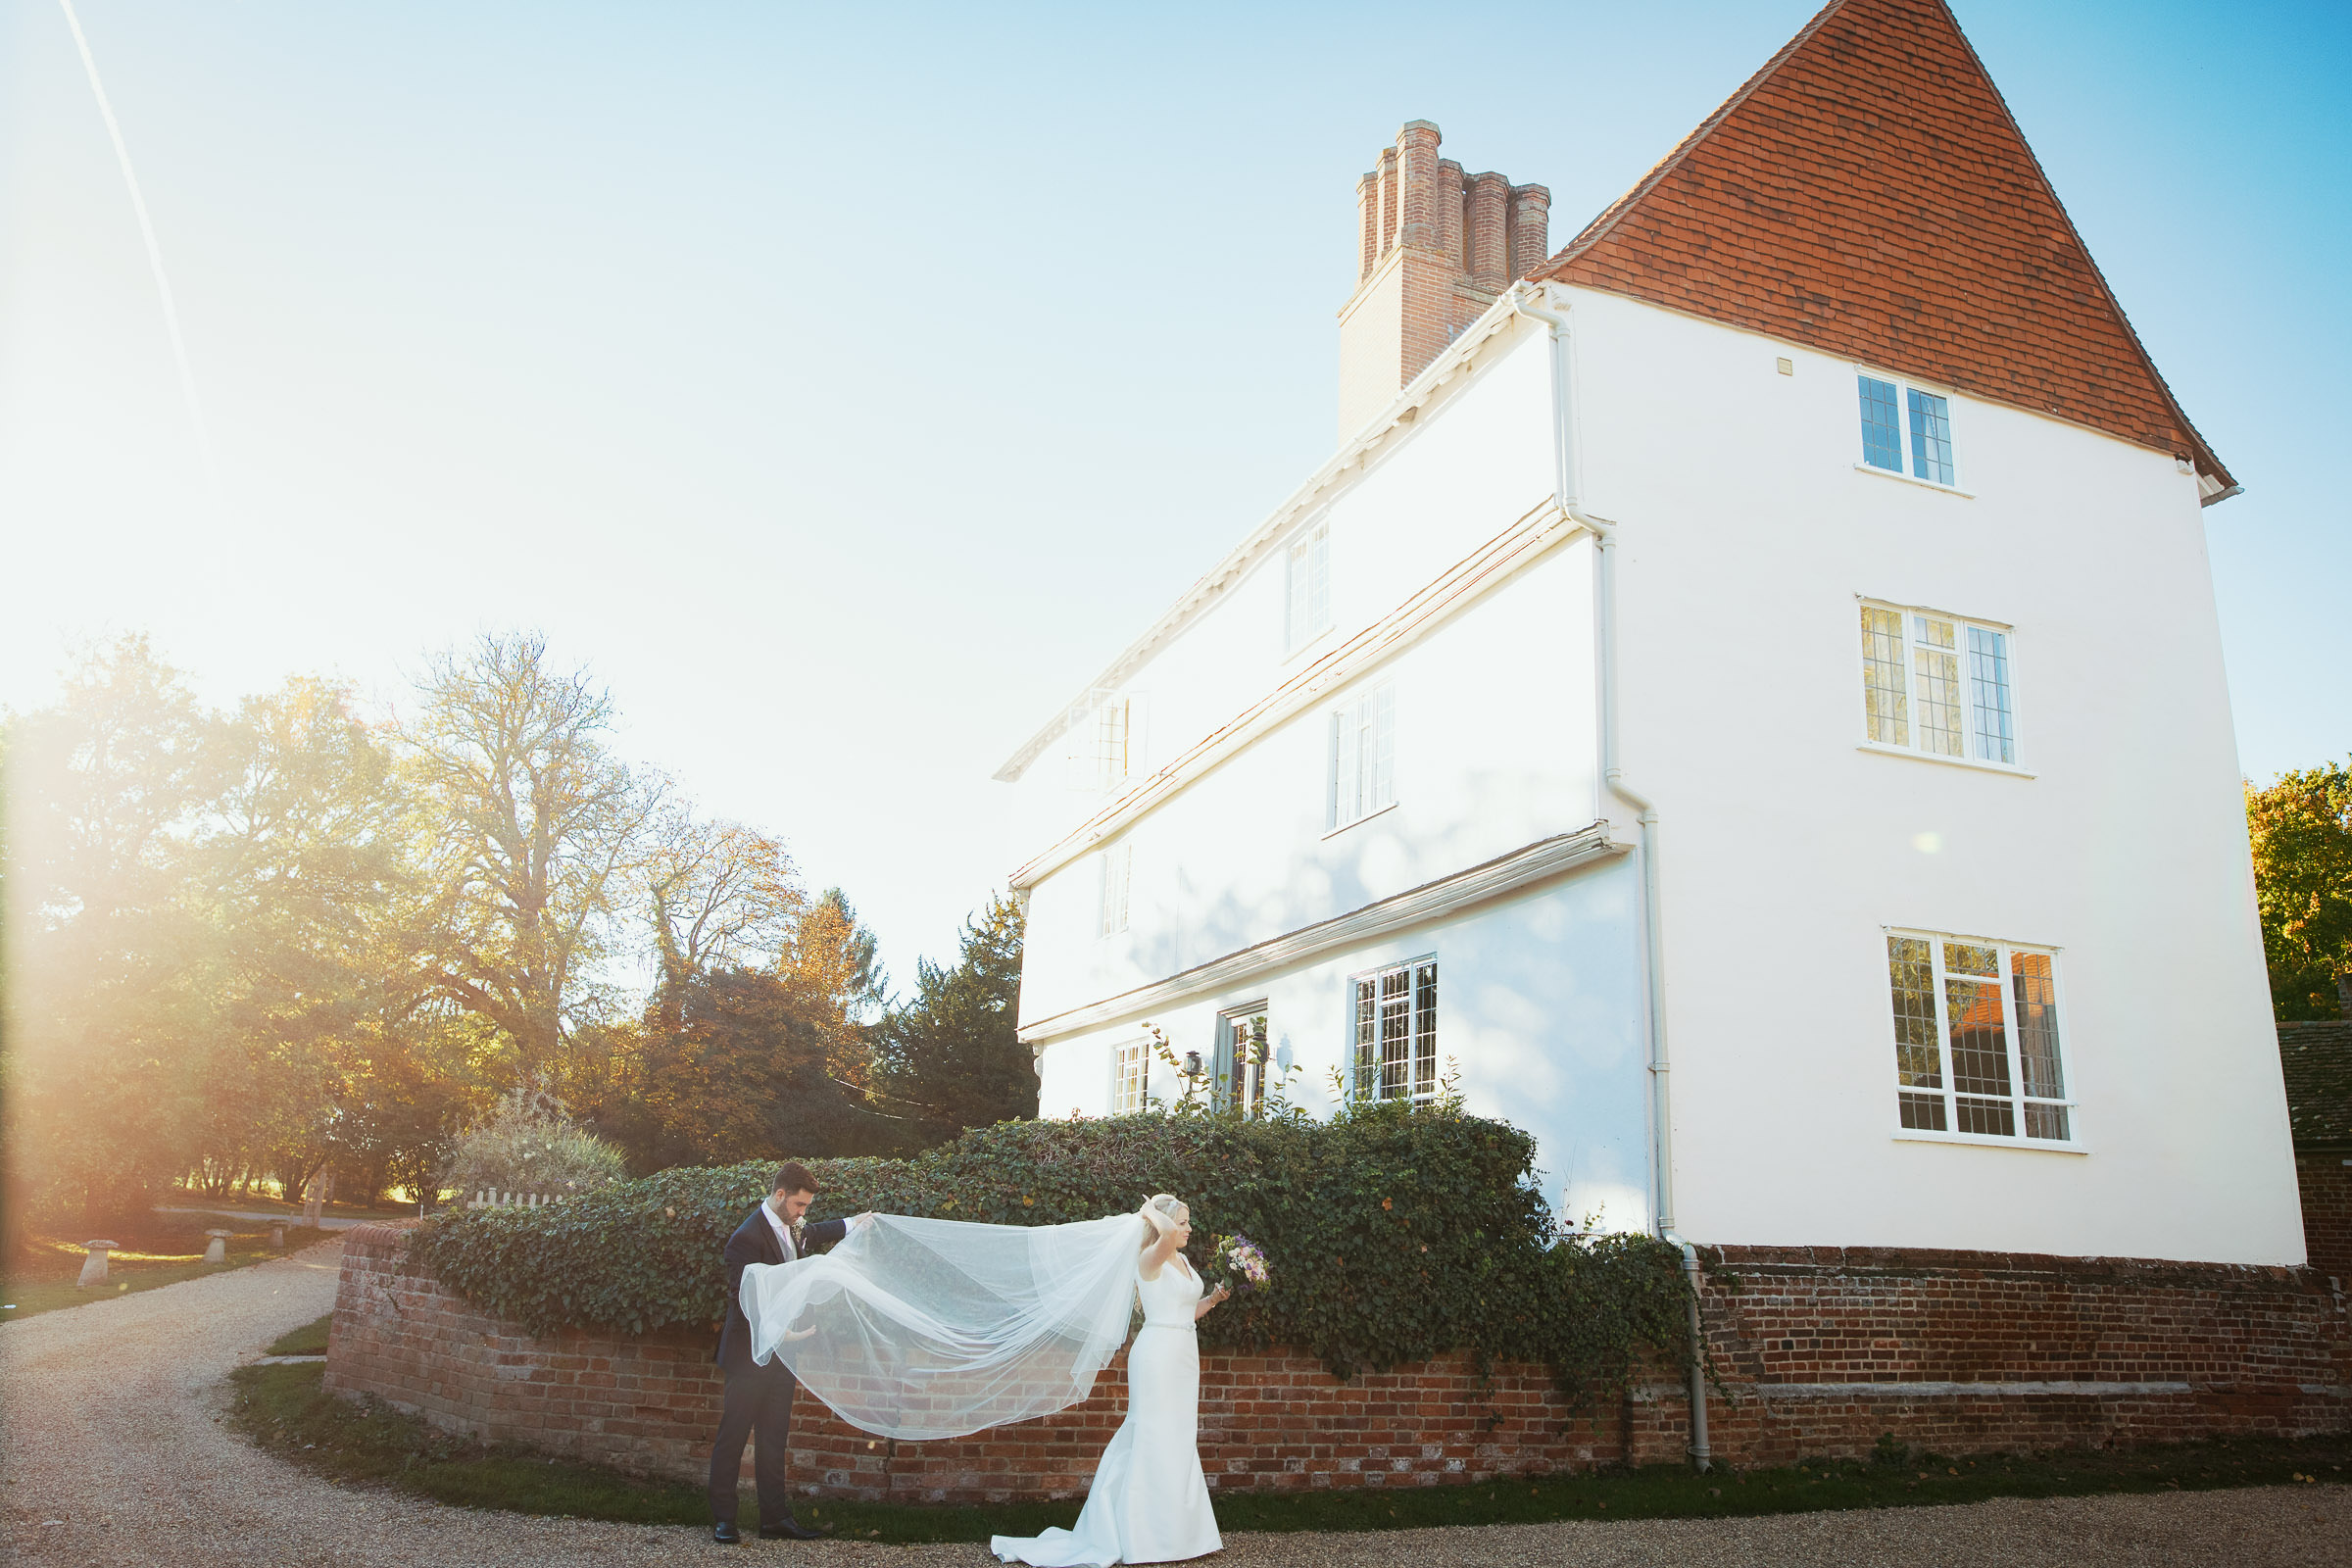 A groom holding his new wife's veil in the wind at a wedding venue in Essex. An autumn wedding photographed by regular Houchins documentary wedding photographer Tracy Morter Photography.